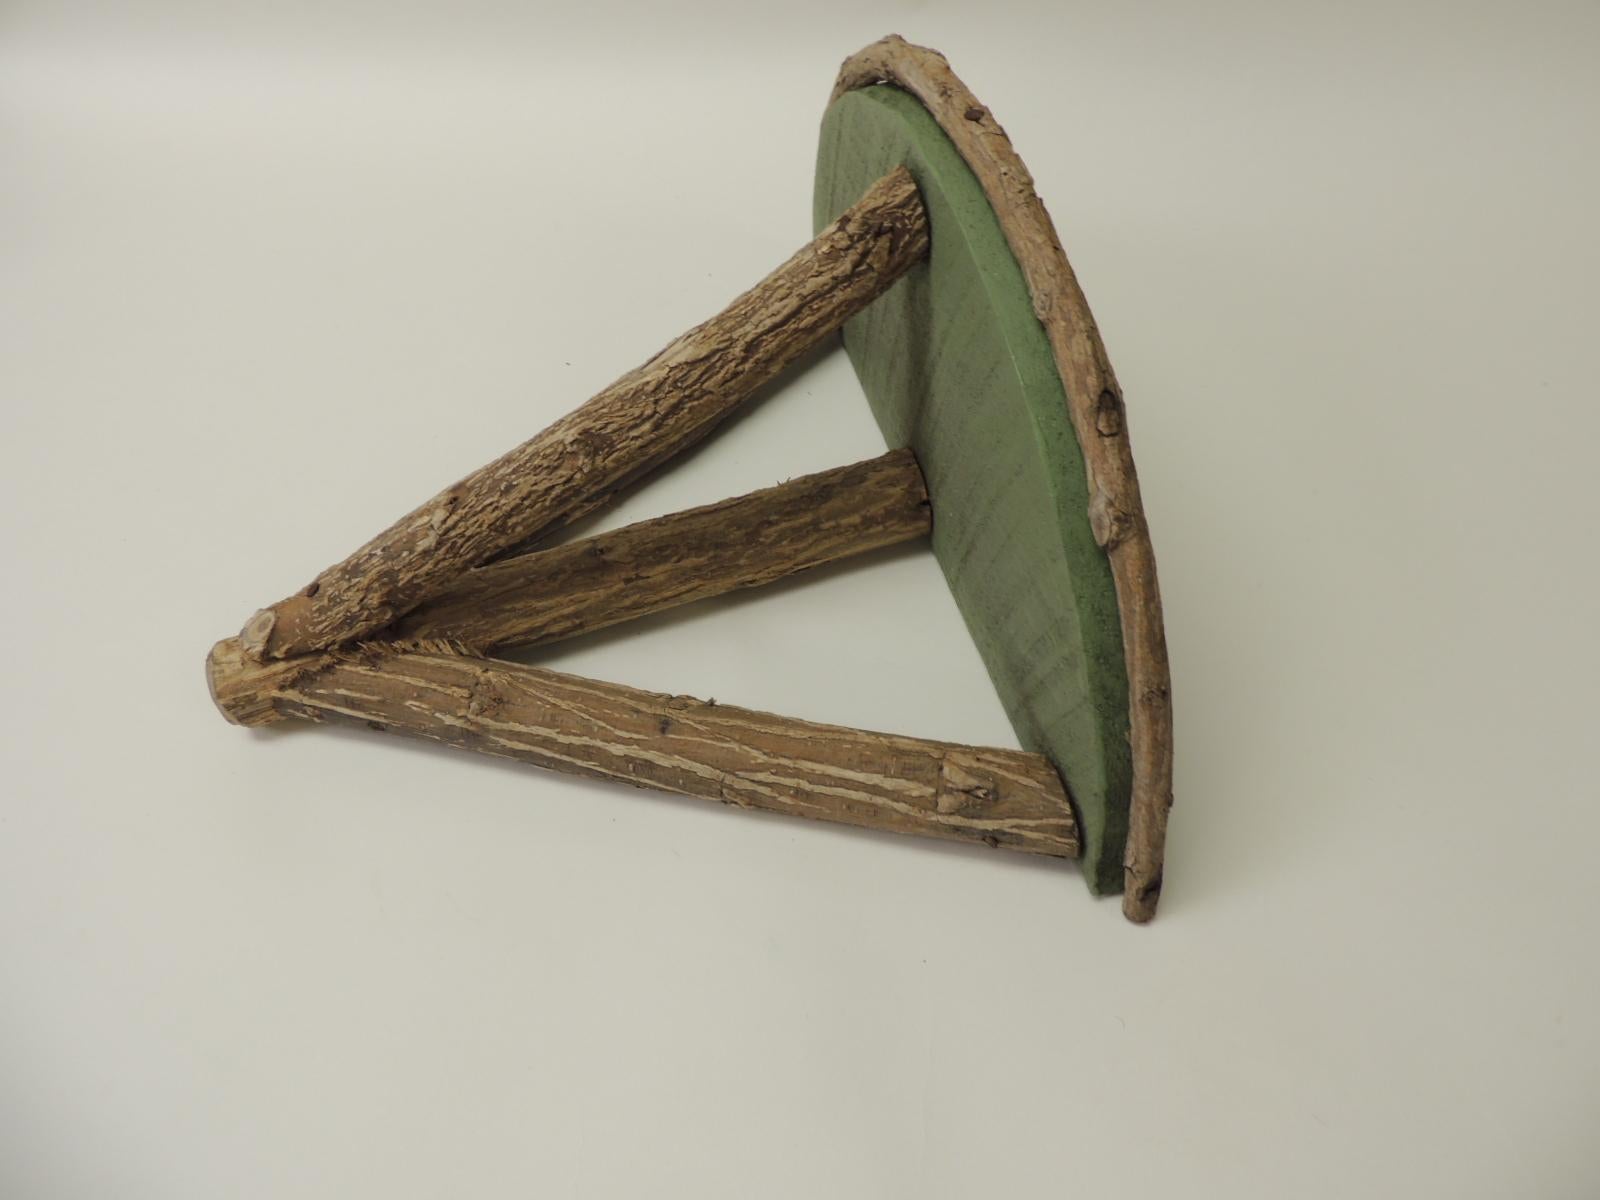 Hand-Crafted Rustic Willow Painted Green Garden Wall Shelf or Bracket